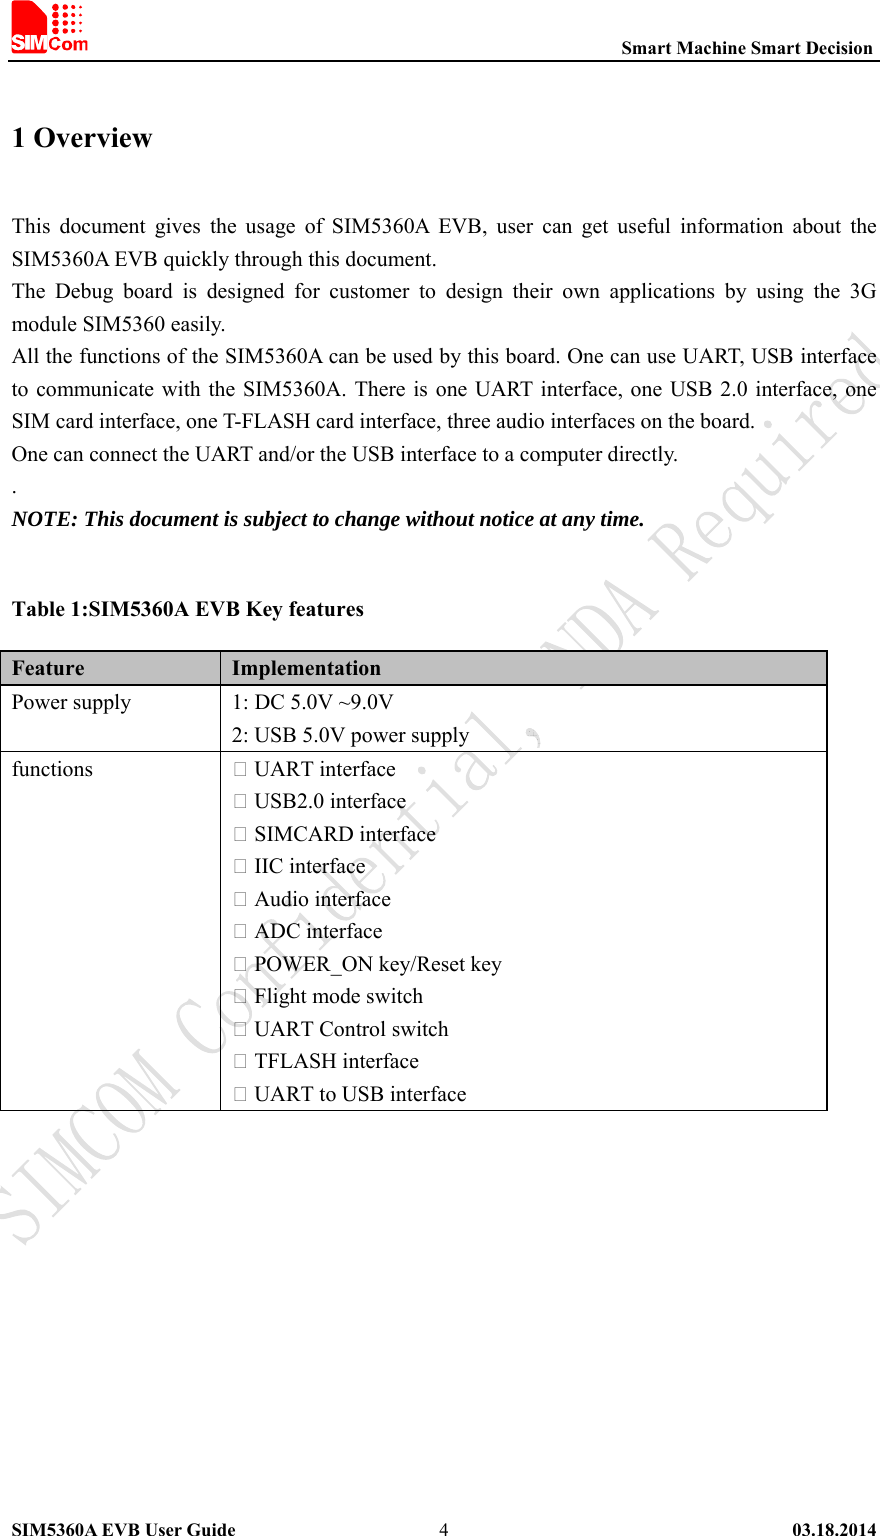                                                          Smart Machine Smart Decision SIM5360A EVB User Guide   03.18.2014   41 Overview   This  document  gives  the  usage  of  SIM5360A  EVB,  user  can  get  useful  information  about  the SIM5360A EVB quickly through this document. The  Debug  board  is  designed  for  customer  to  design  their  own  applications  by  using  the  3G module SIM5360 easily. All the functions of the SIM5360A can be used by this board. One can use UART, USB interface to communicate with the  SIM5360A. There is  one  UART interface, one USB 2.0 interface, one SIM card interface, one T-FLASH card interface, three audio interfaces on the board. One can connect the UART and/or the USB interface to a computer directly. .   NOTE: This document is subject to change without notice at any time.  Table 1:SIM5360A EVB Key features Feature Implementation Power supply   1: DC 5.0V ~9.0V 2: USB 5.0V power supply functions  UART interface  USB2.0 interface  SIMCARD interface  IIC interface  Audio interface  ADC interface  POWER_ON key/Reset key  Flight mode switch  UART Control switch  TFLASH interface  UART to USB interface 